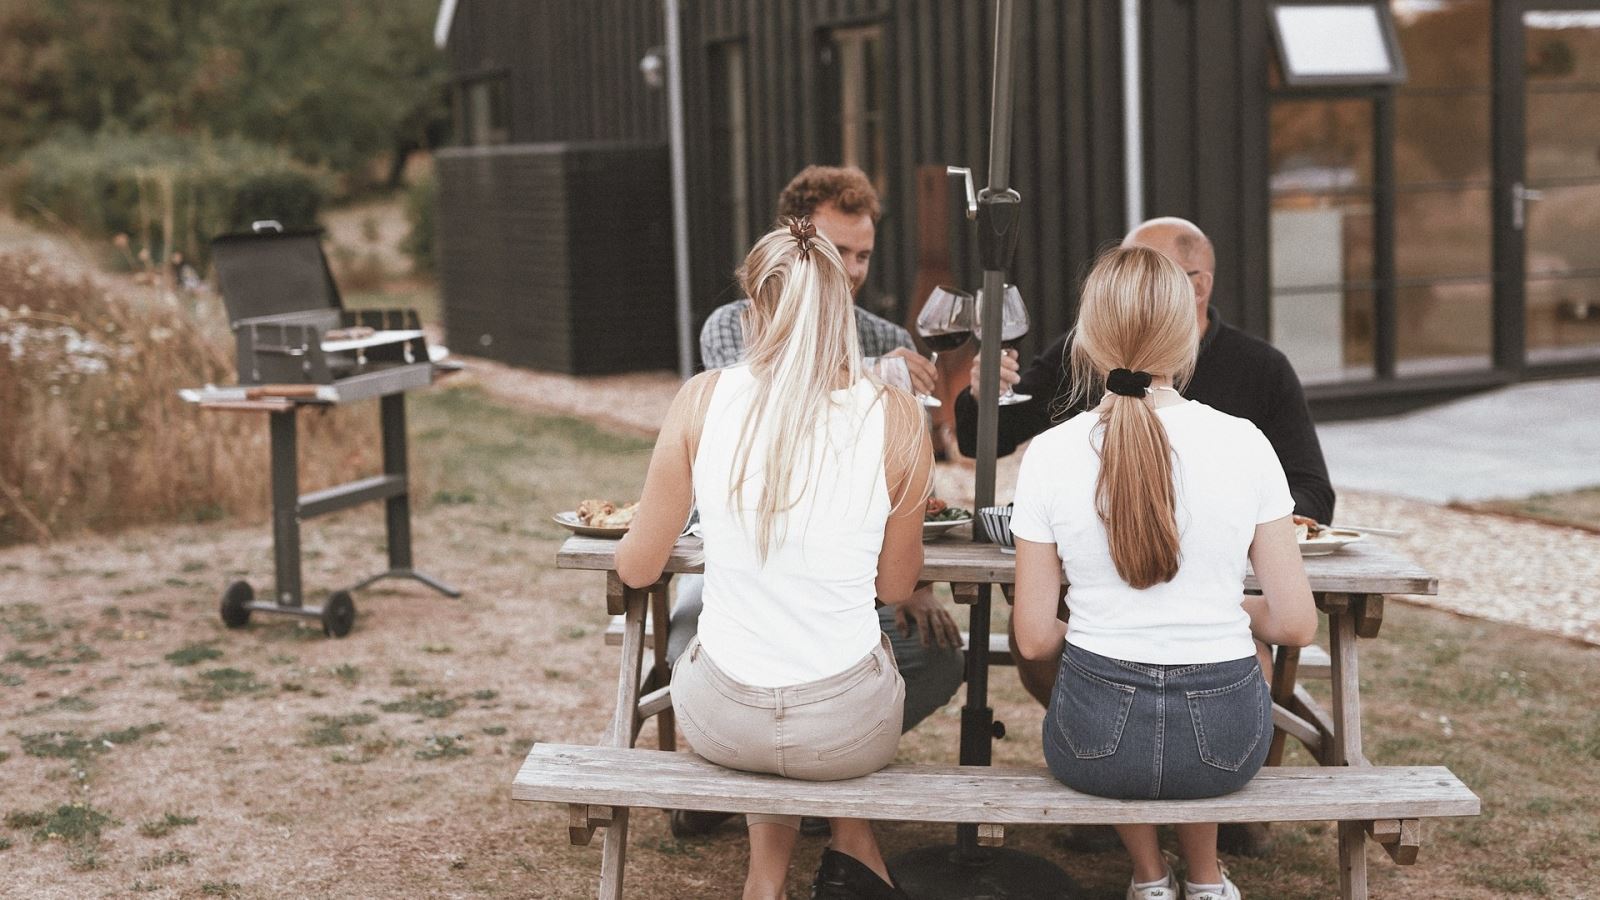 Four people sat outside on a picnic table drinking wine in front of a barn house